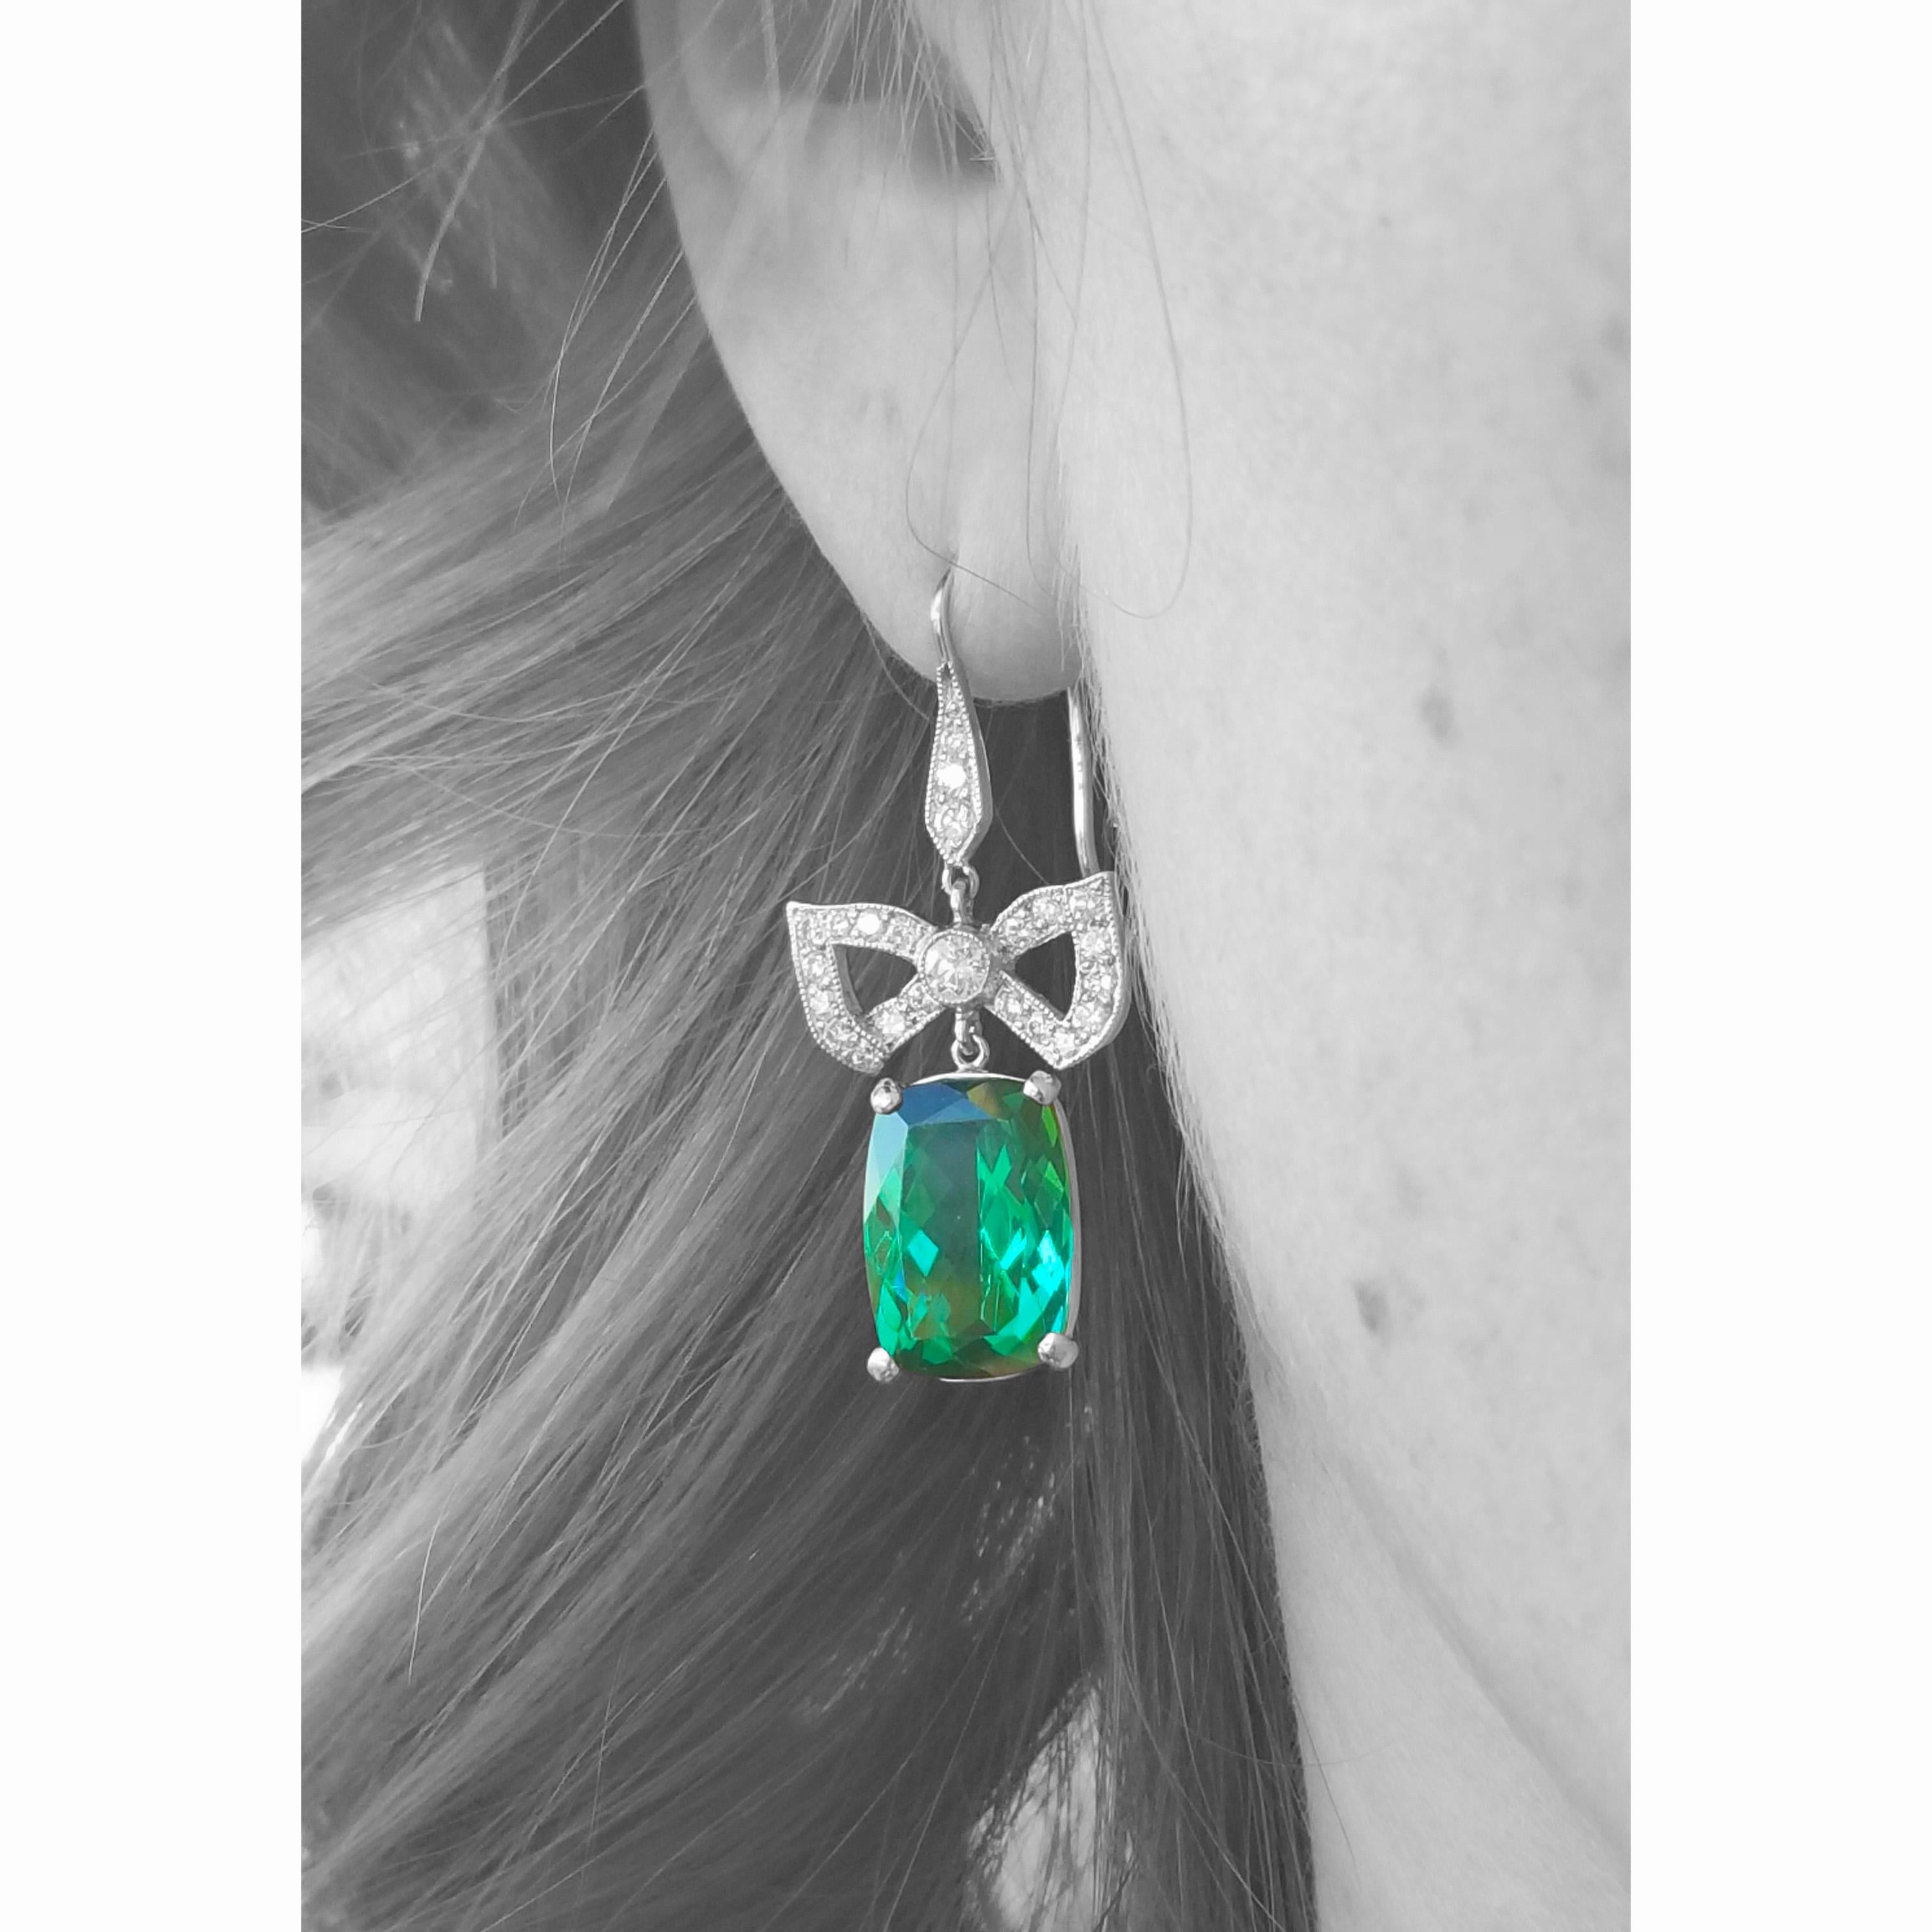 This pair of exquisitely cut and perfectly matched green tourmaline are stunning in these graceful platinum and white 18kt diamond earrings. A nod to old European design, the classic bow earrings are updated with modern cut tourmalines and